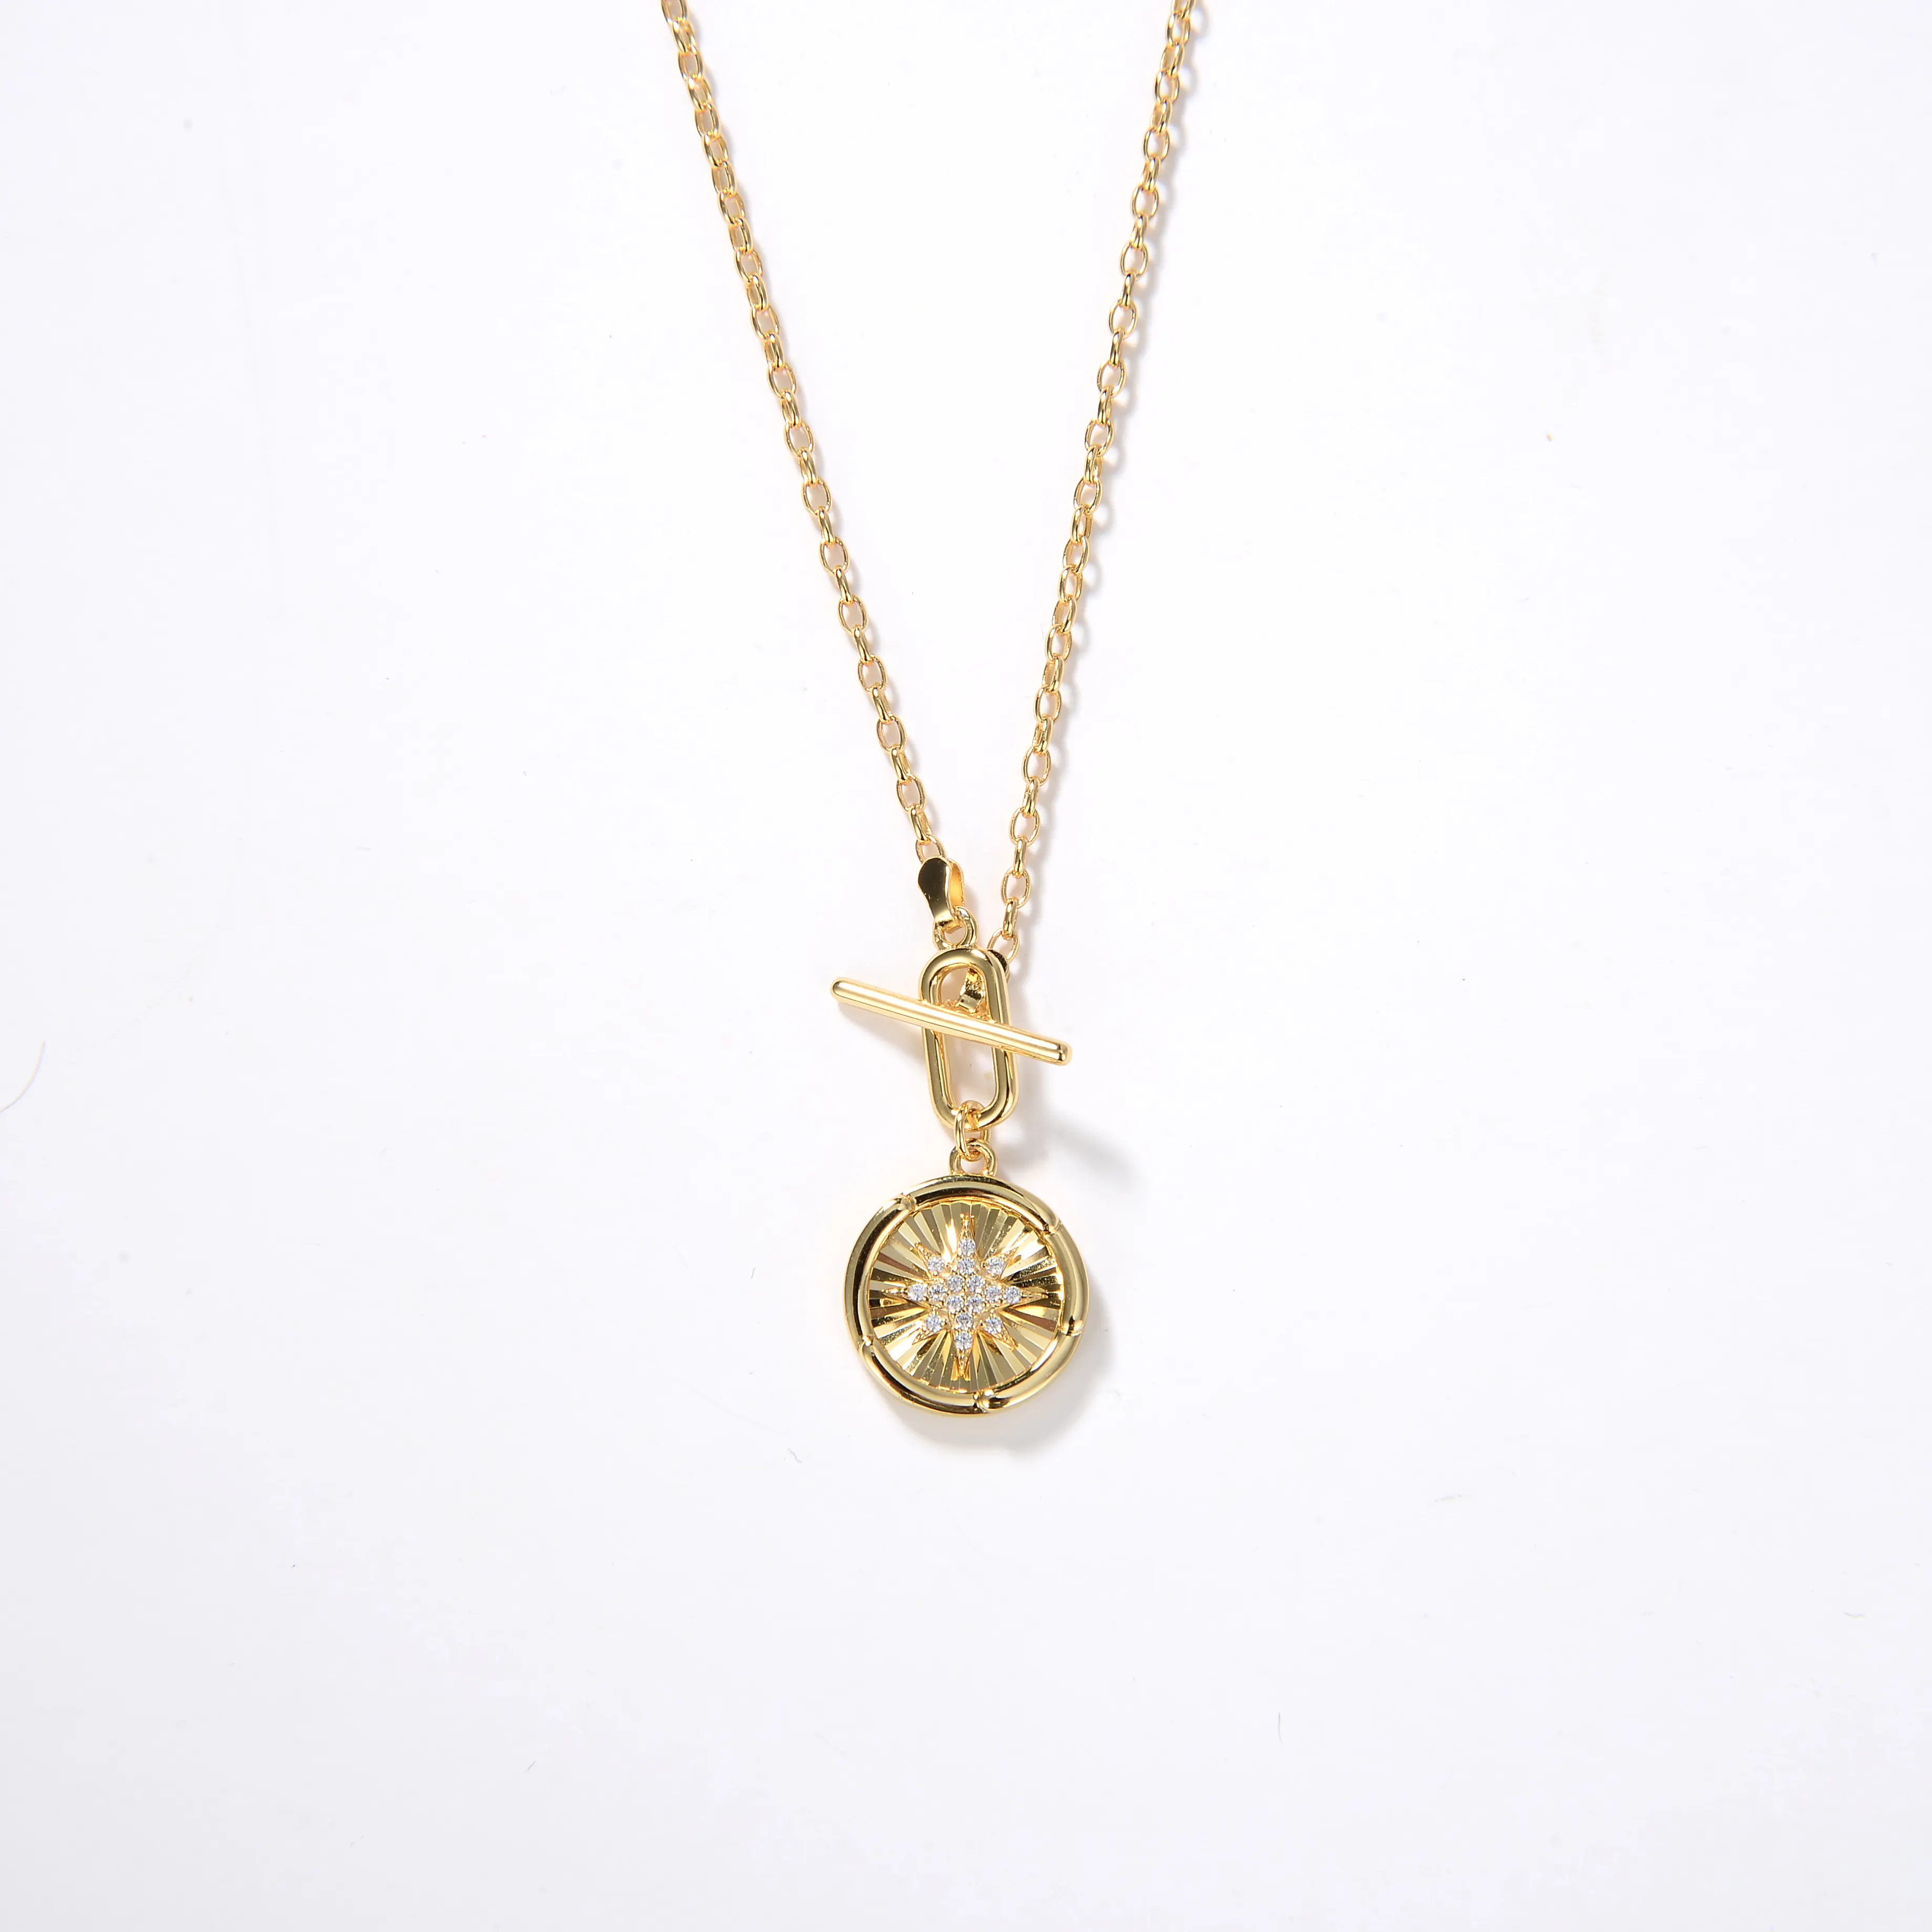 Genuine Low Price Fast Delivery Pretty Fashion Jewelry Necklaces Golden Circular Pendant Necklace